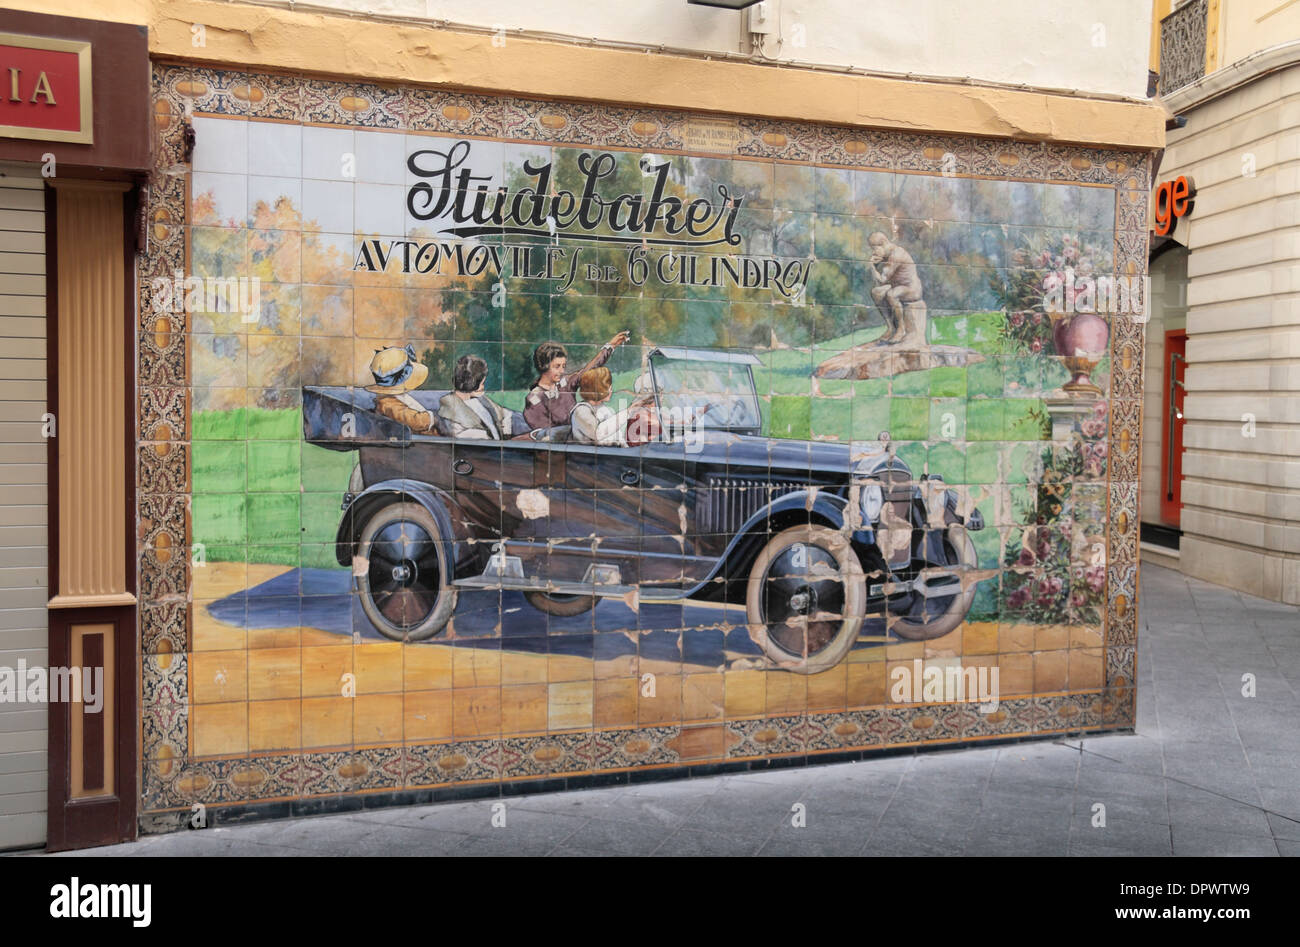 Beautiful tiled street artwork showing the Studebaker, a 6 cylinder car, in Seville (Sevilla), Andalusia, Spain. Stock Photo